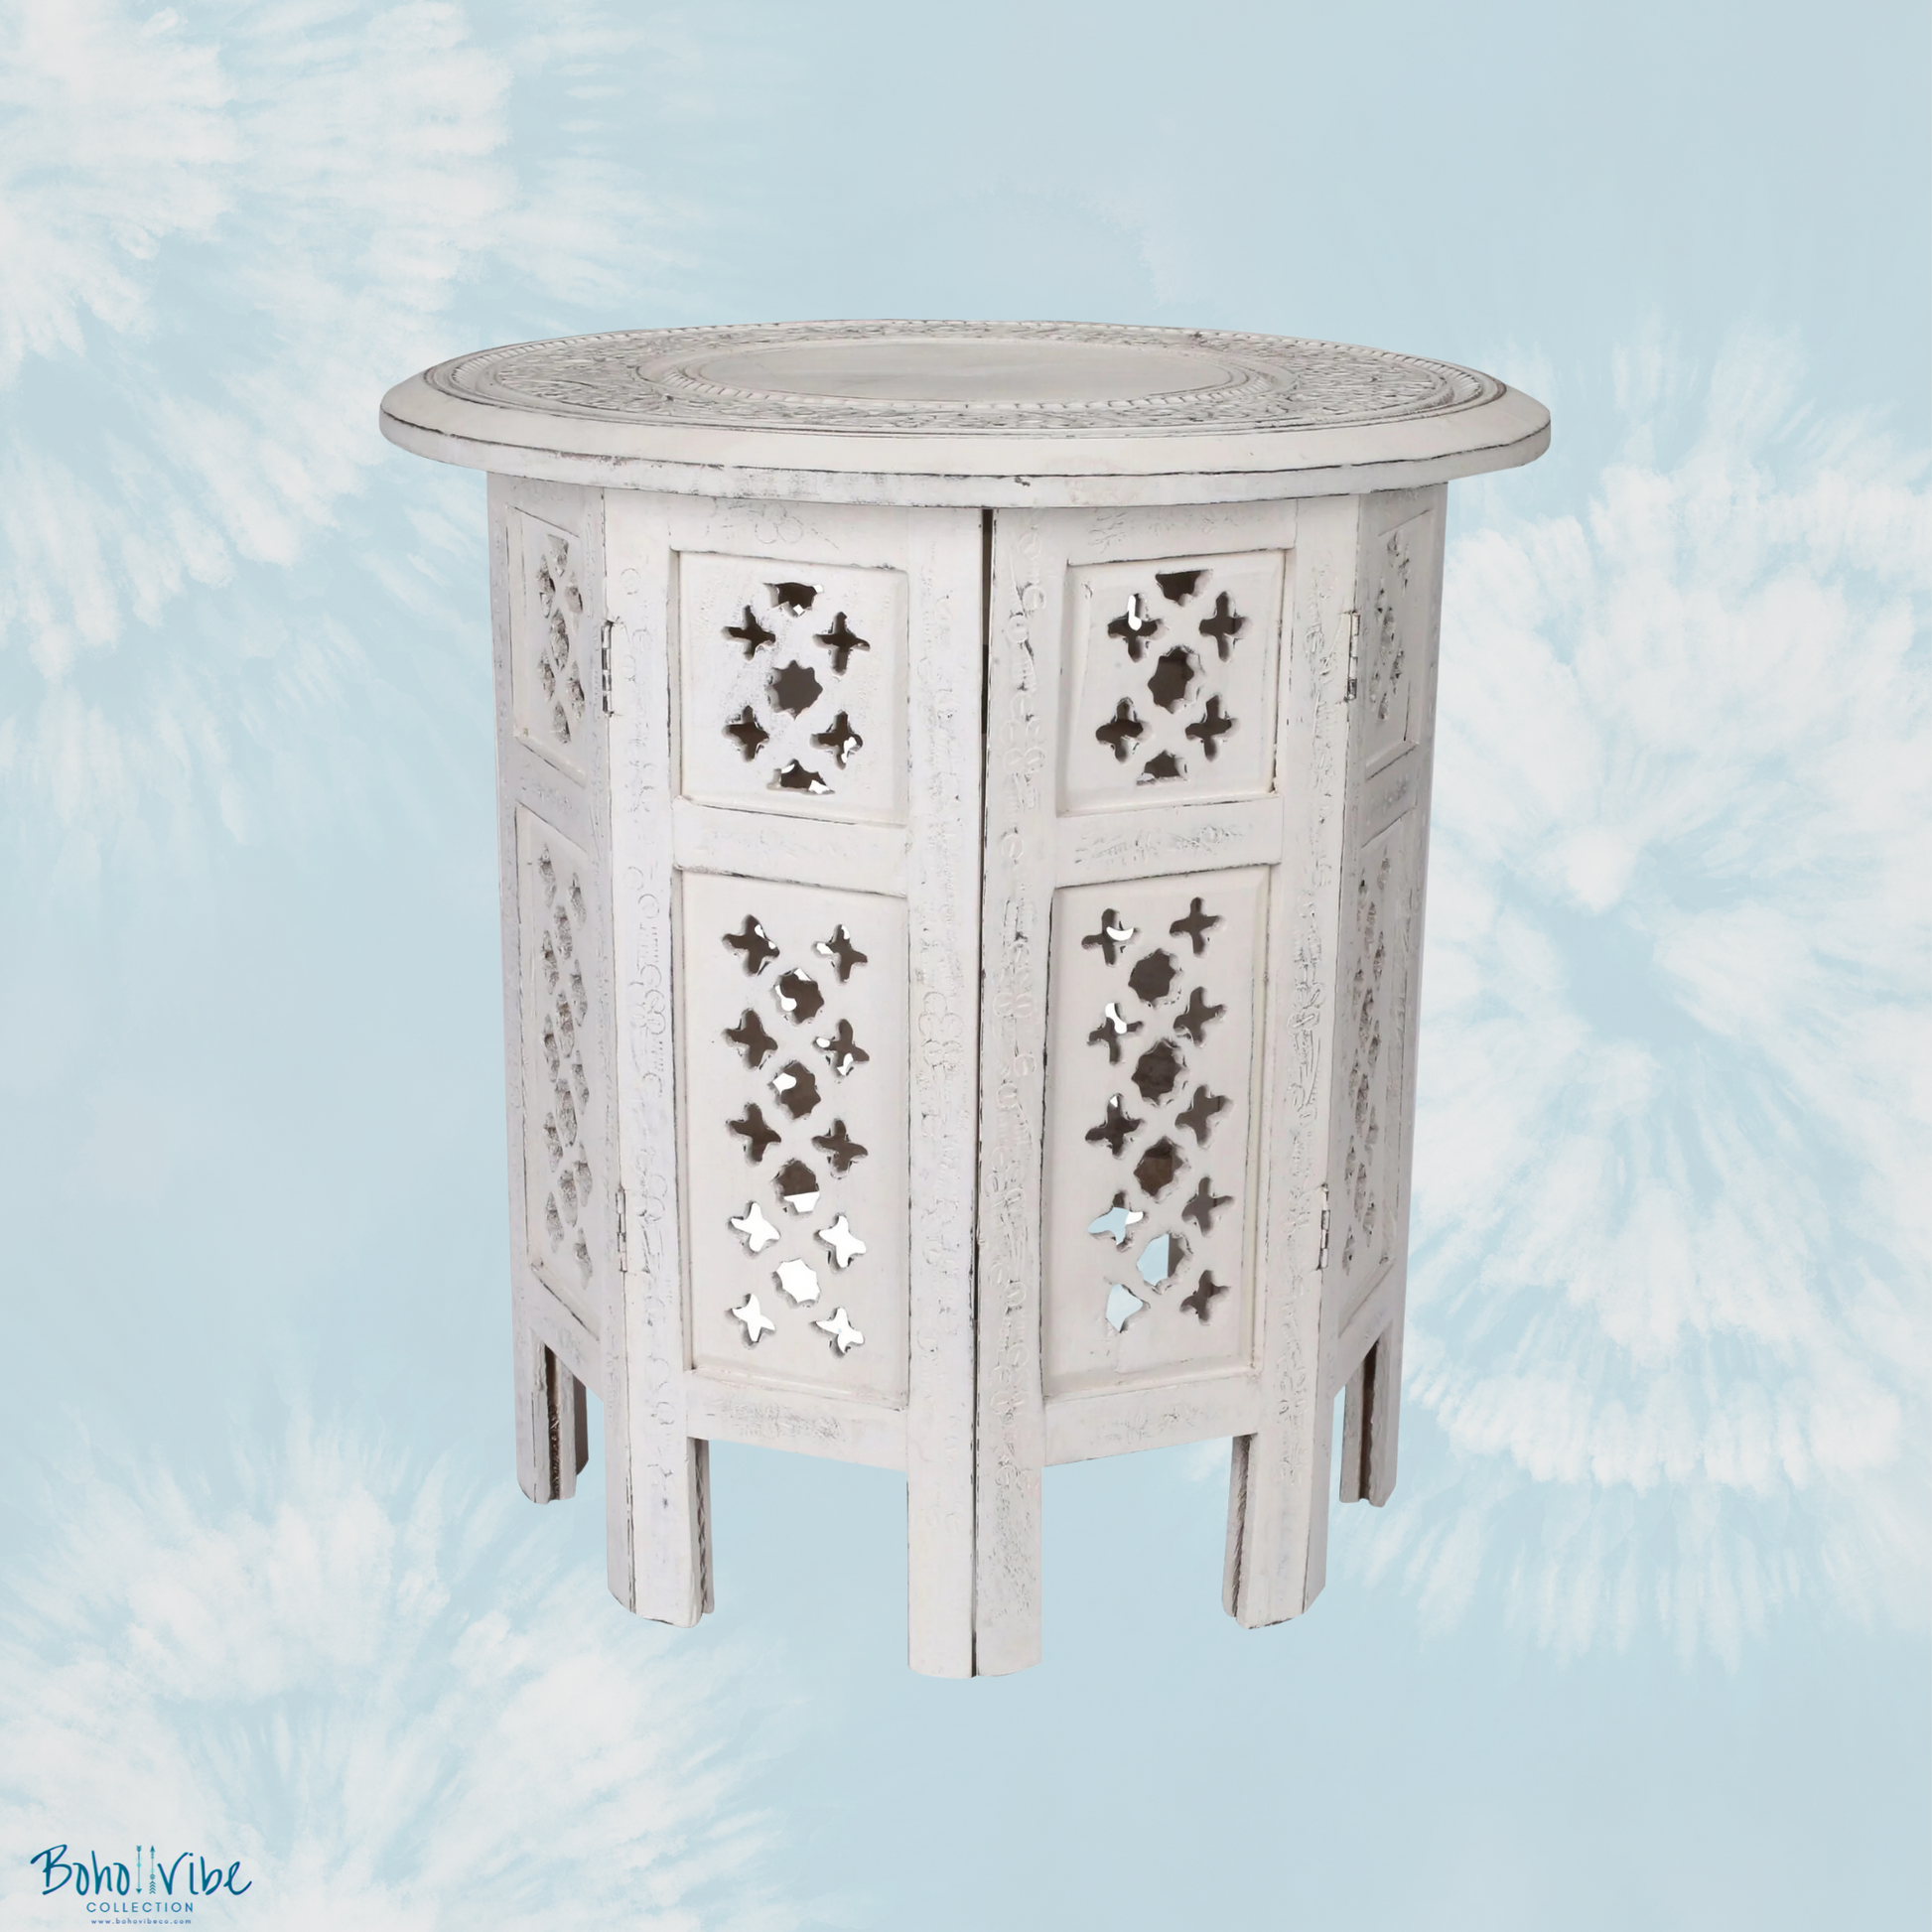 Boho ↡↟ Vibe Collection ↠ Balinese Style Round Table Bohemian Solid Timber Coastal Side Table 